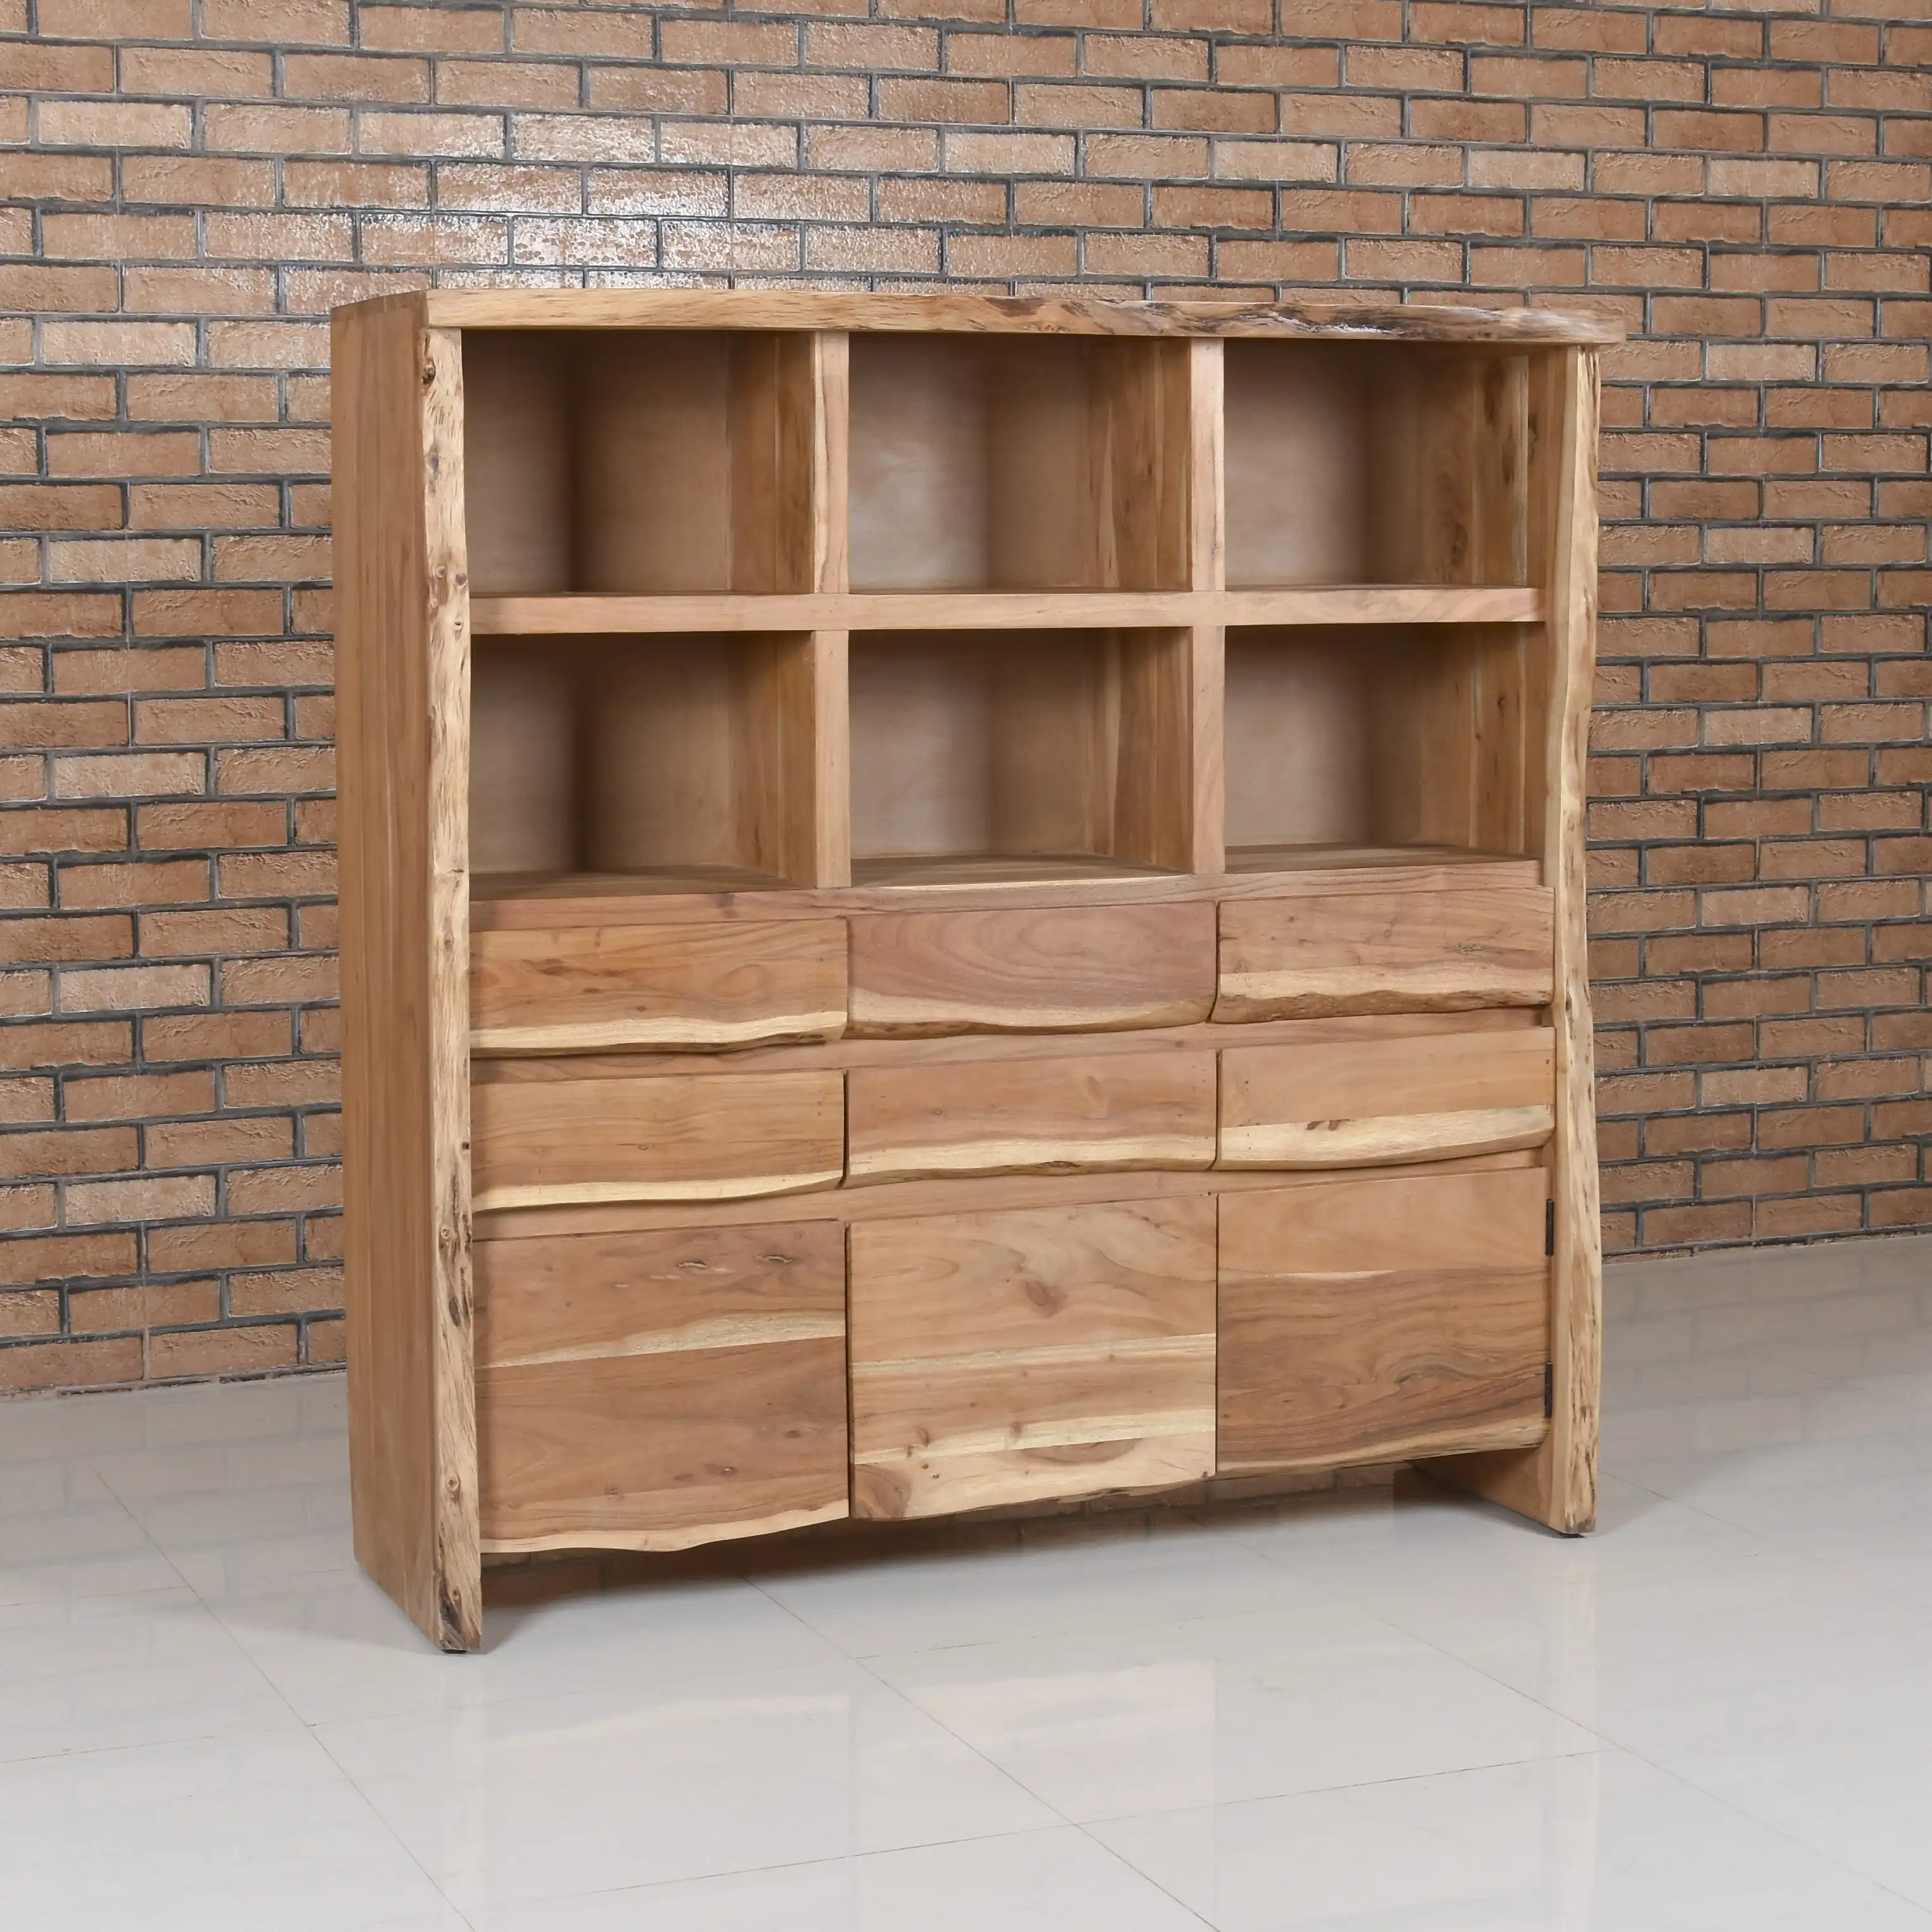 Wooden Live Edge Cabinet with 4 Drawers & 10 Open Shelves - popular handicrafts